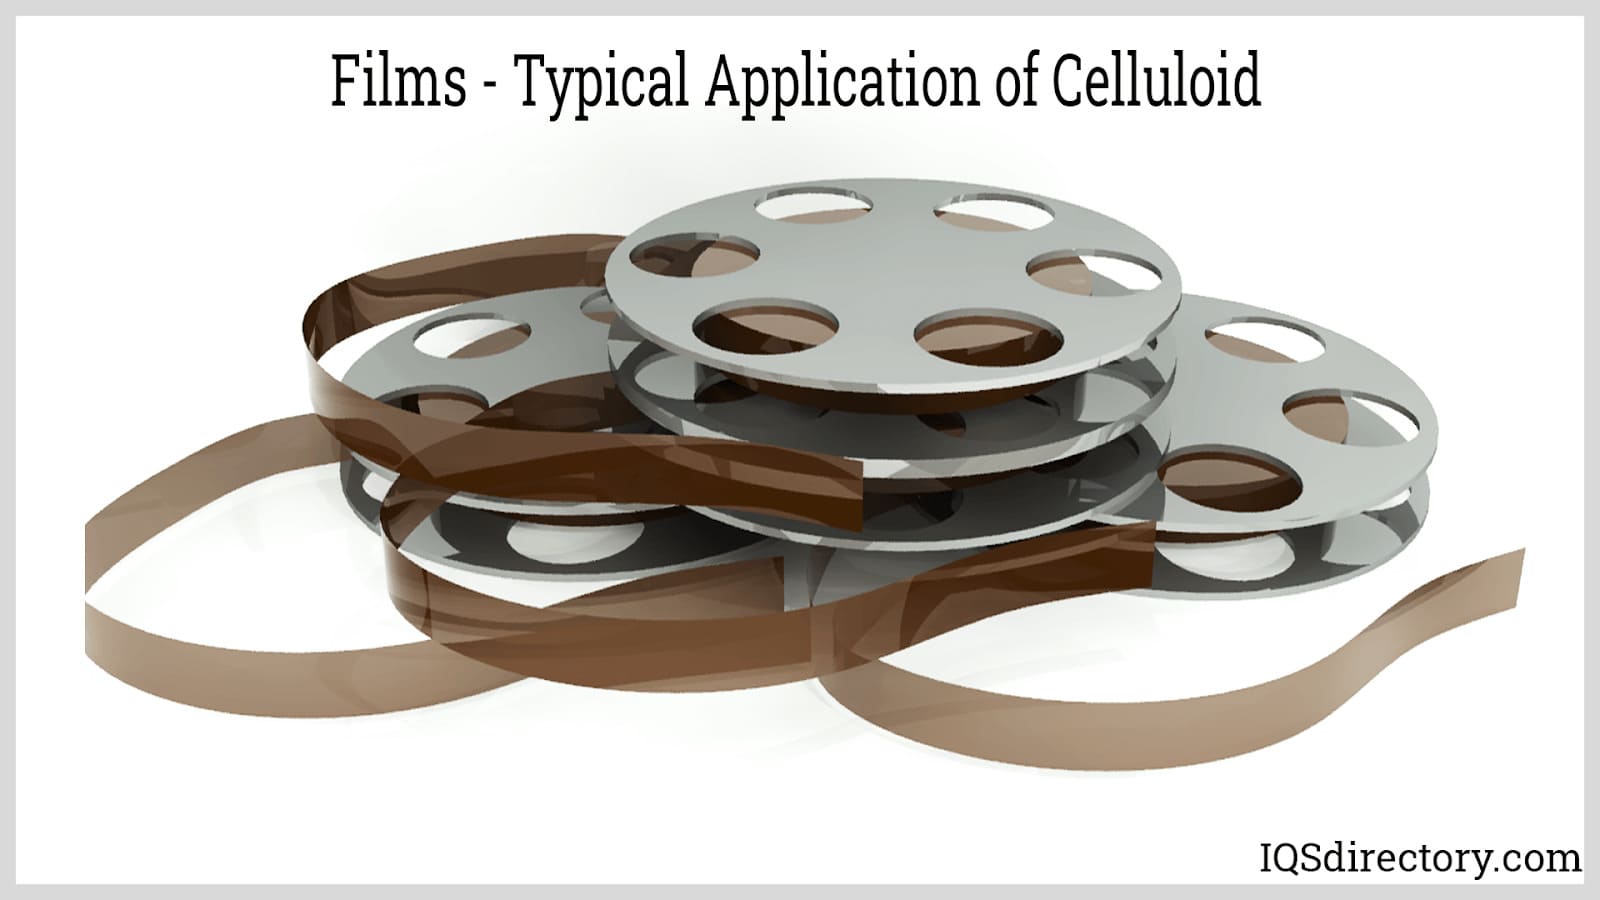 Films - Typical Application of Celluloid